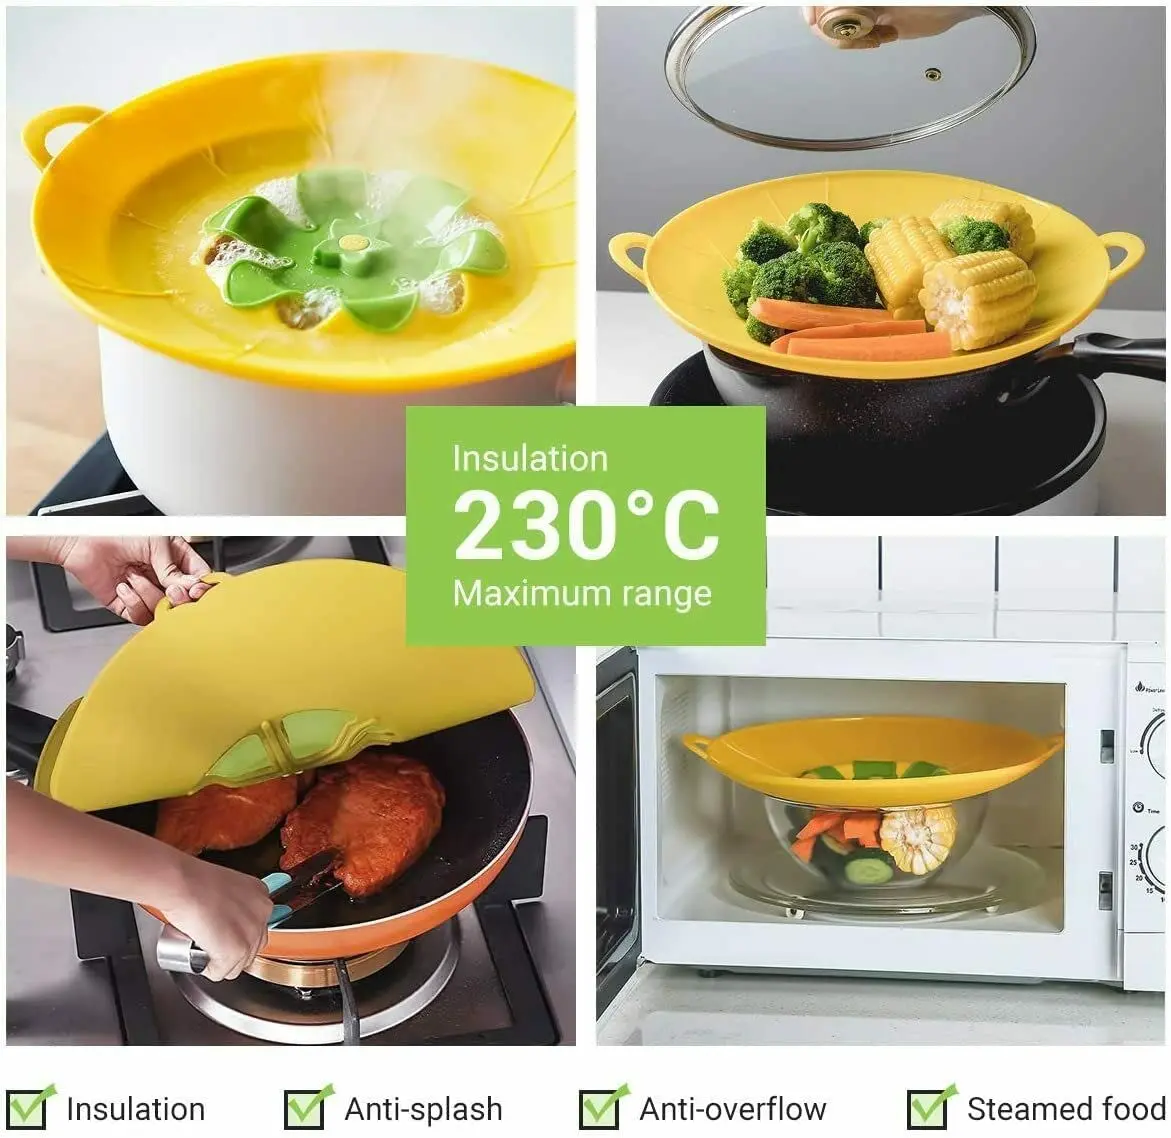 https://ae01.alicdn.com/kf/Sa8687651db134c9c818aab01d94fabc7G/Spill-Stopper-Lid-Cover-Silicone-Boil-Over-Safeguard-Over-Boiling-Anti-Spill-Lid-Cover-Pot-Pan.jpg